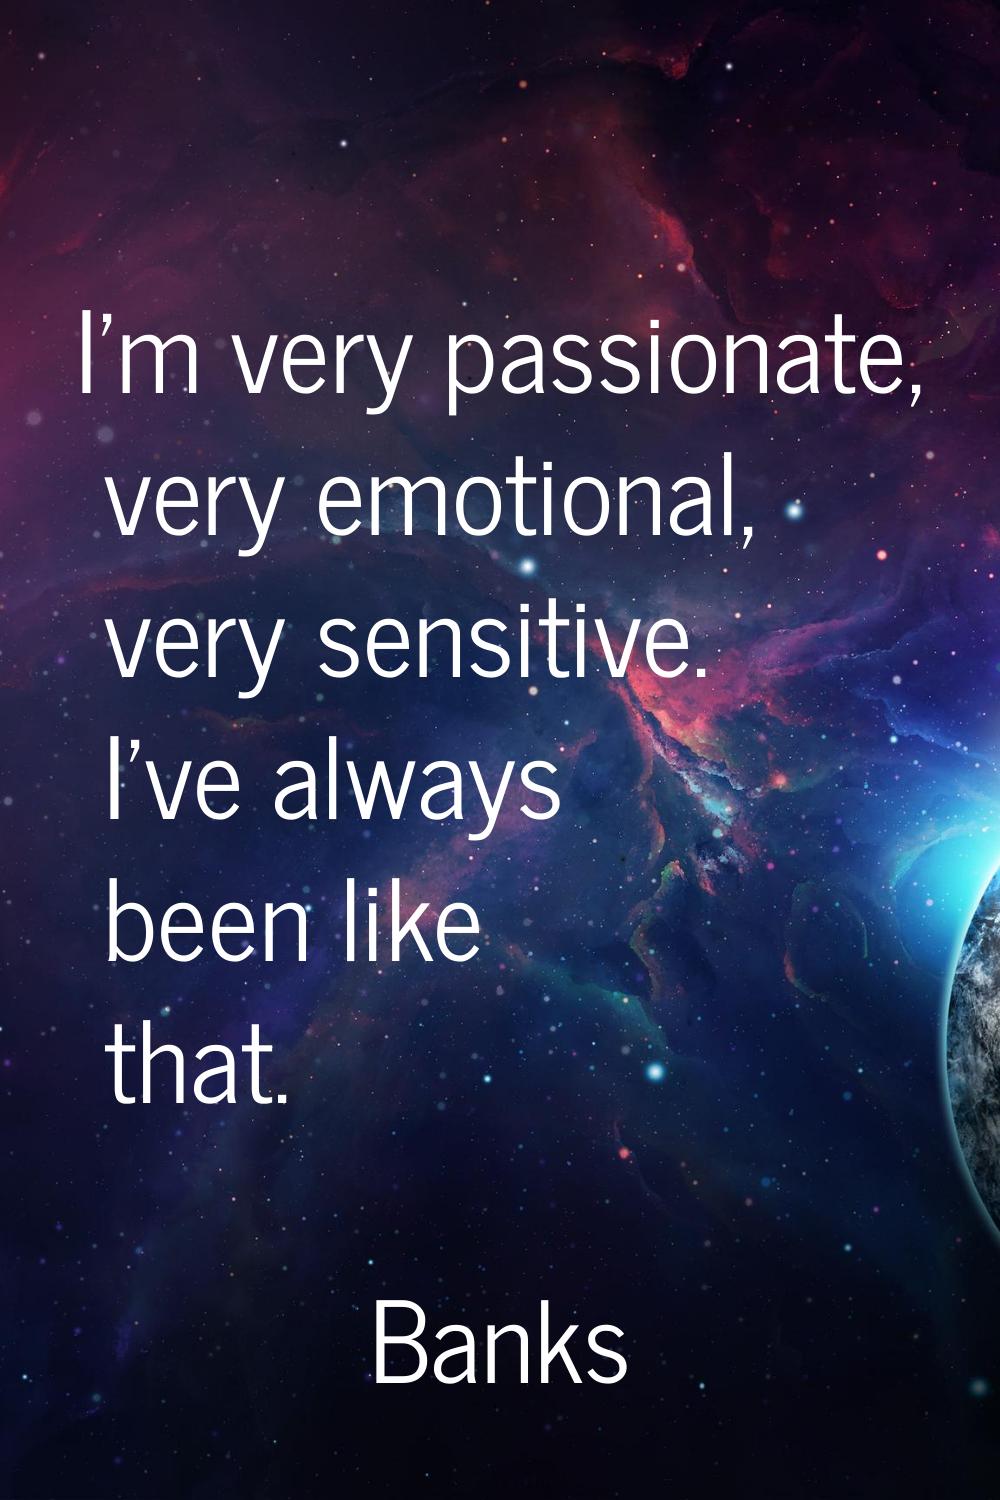 I'm very passionate, very emotional, very sensitive. I've always been like that.